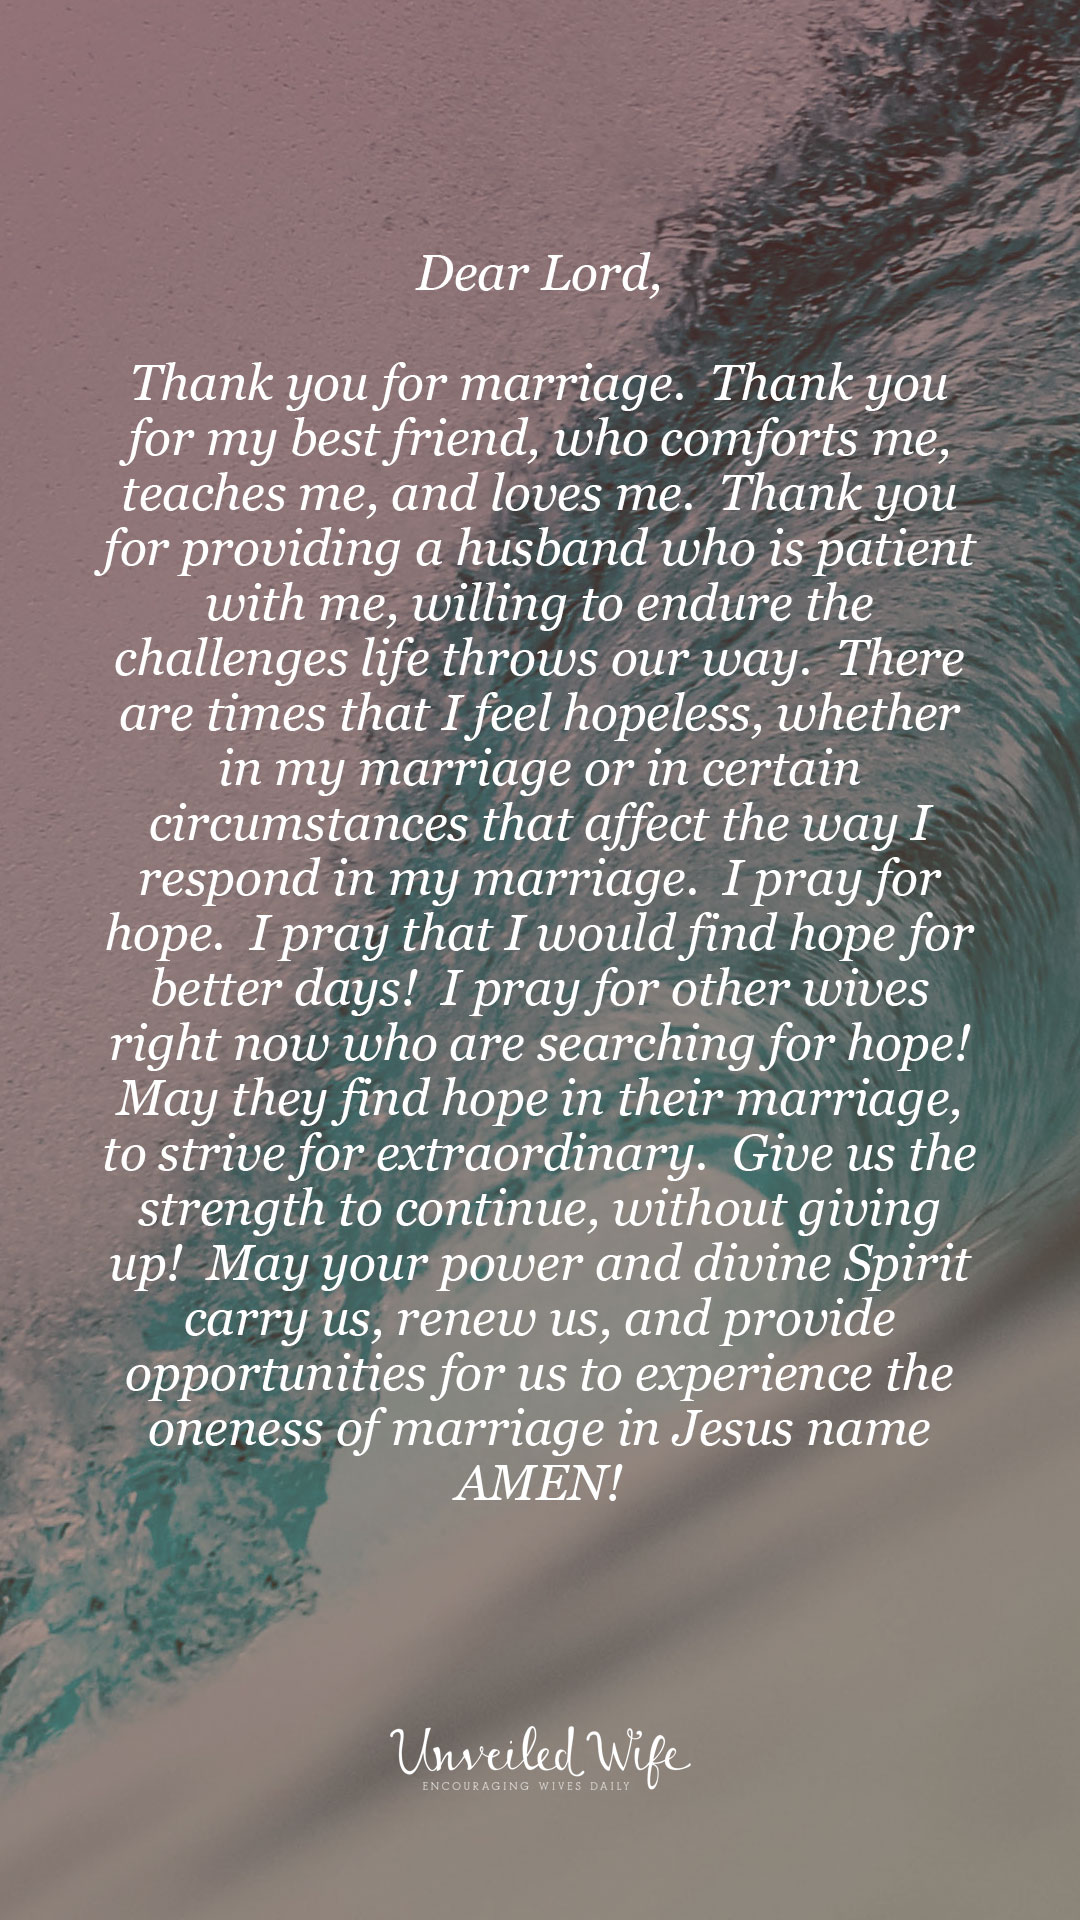 Prayer Of The Day – Finding Hope In Marriage